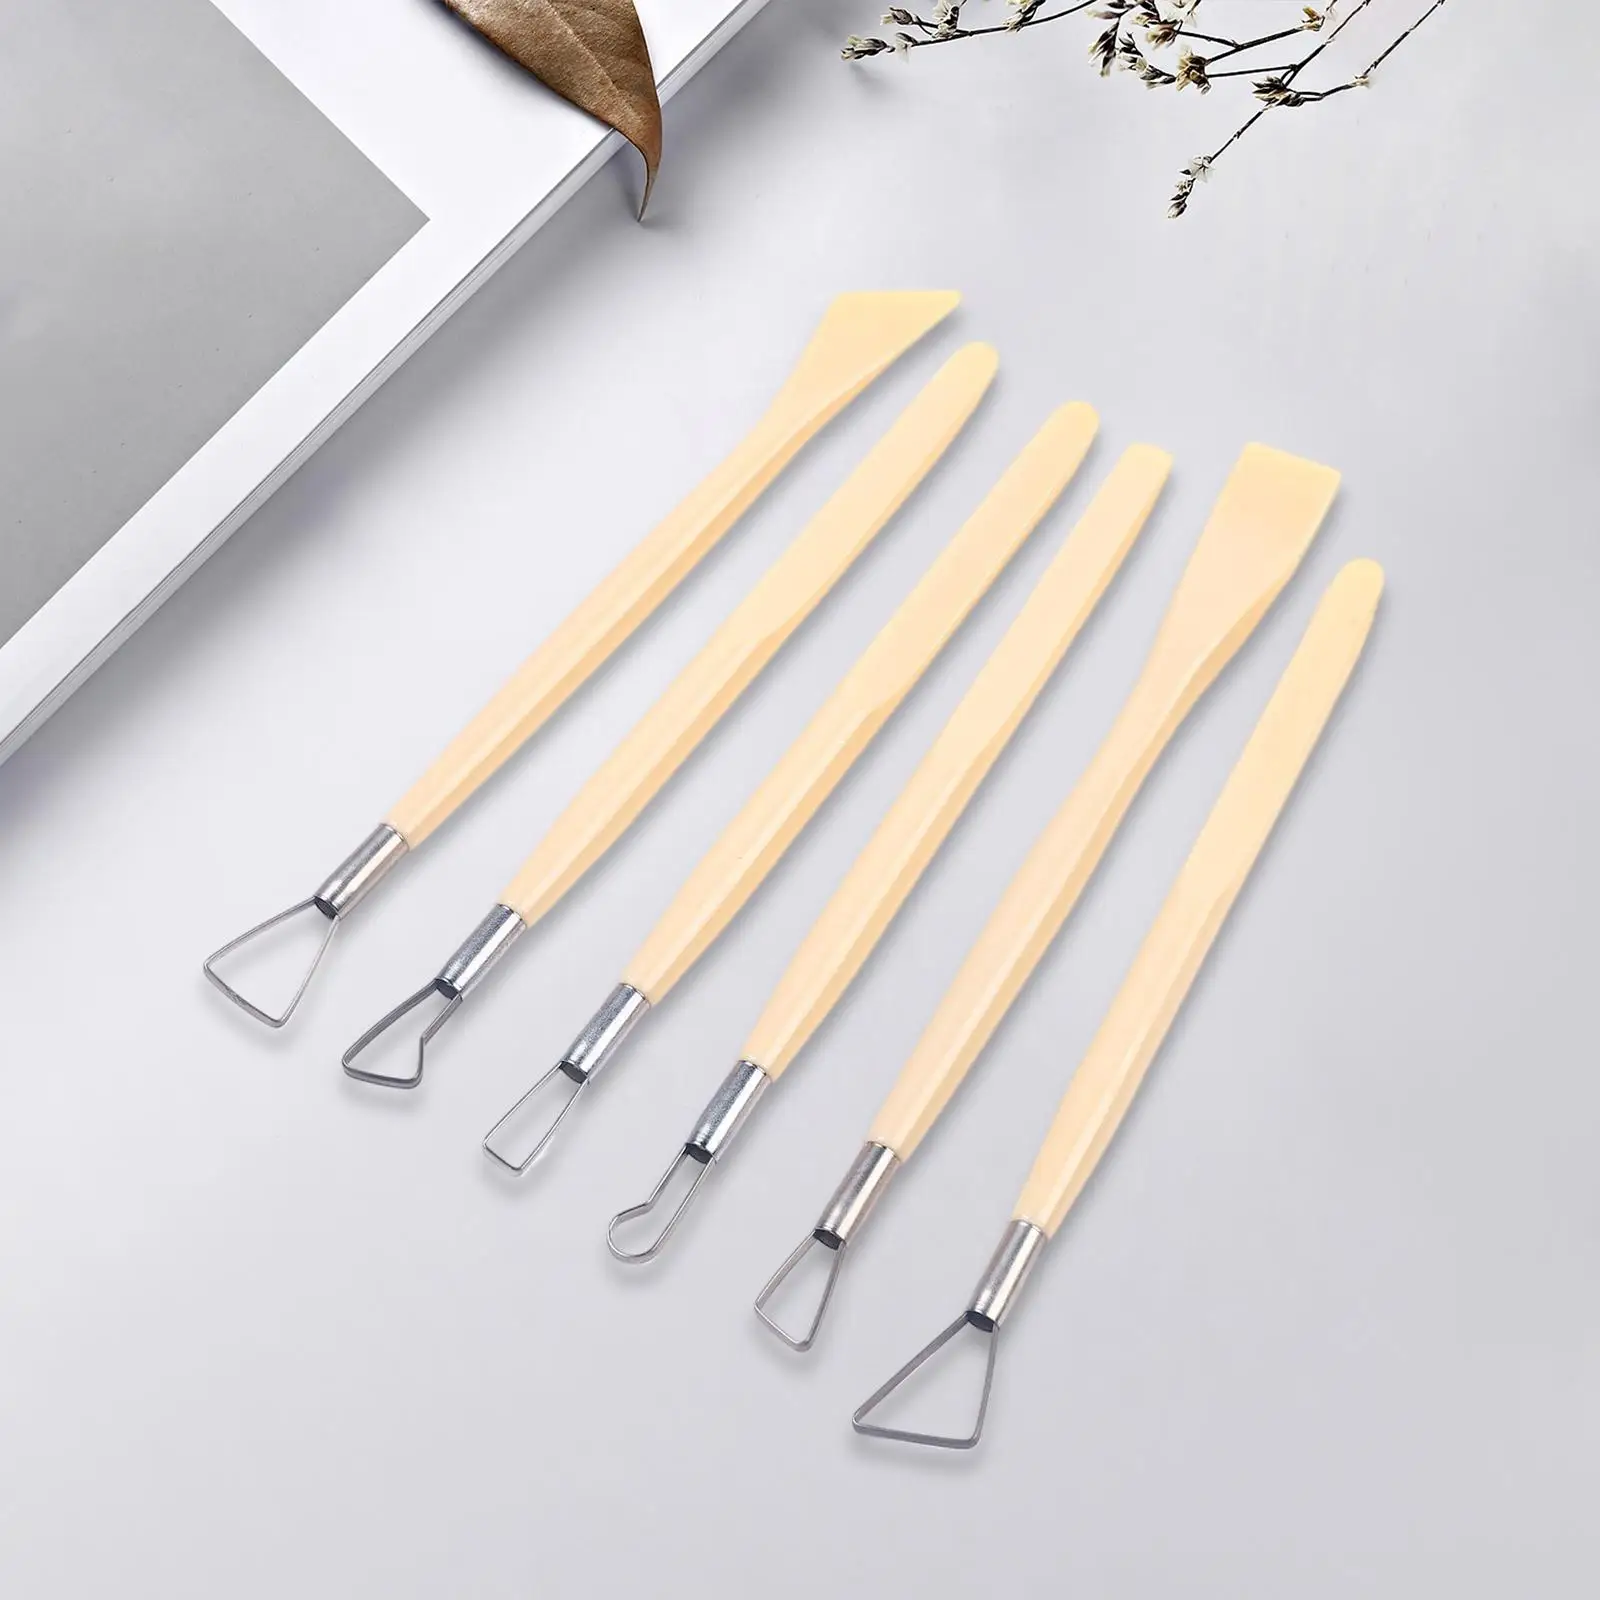 Pack of 6 Double Ended Modeling Sculpting Tool Multipurpose Accessories Durable with Different Tips for Detailing and Trimming